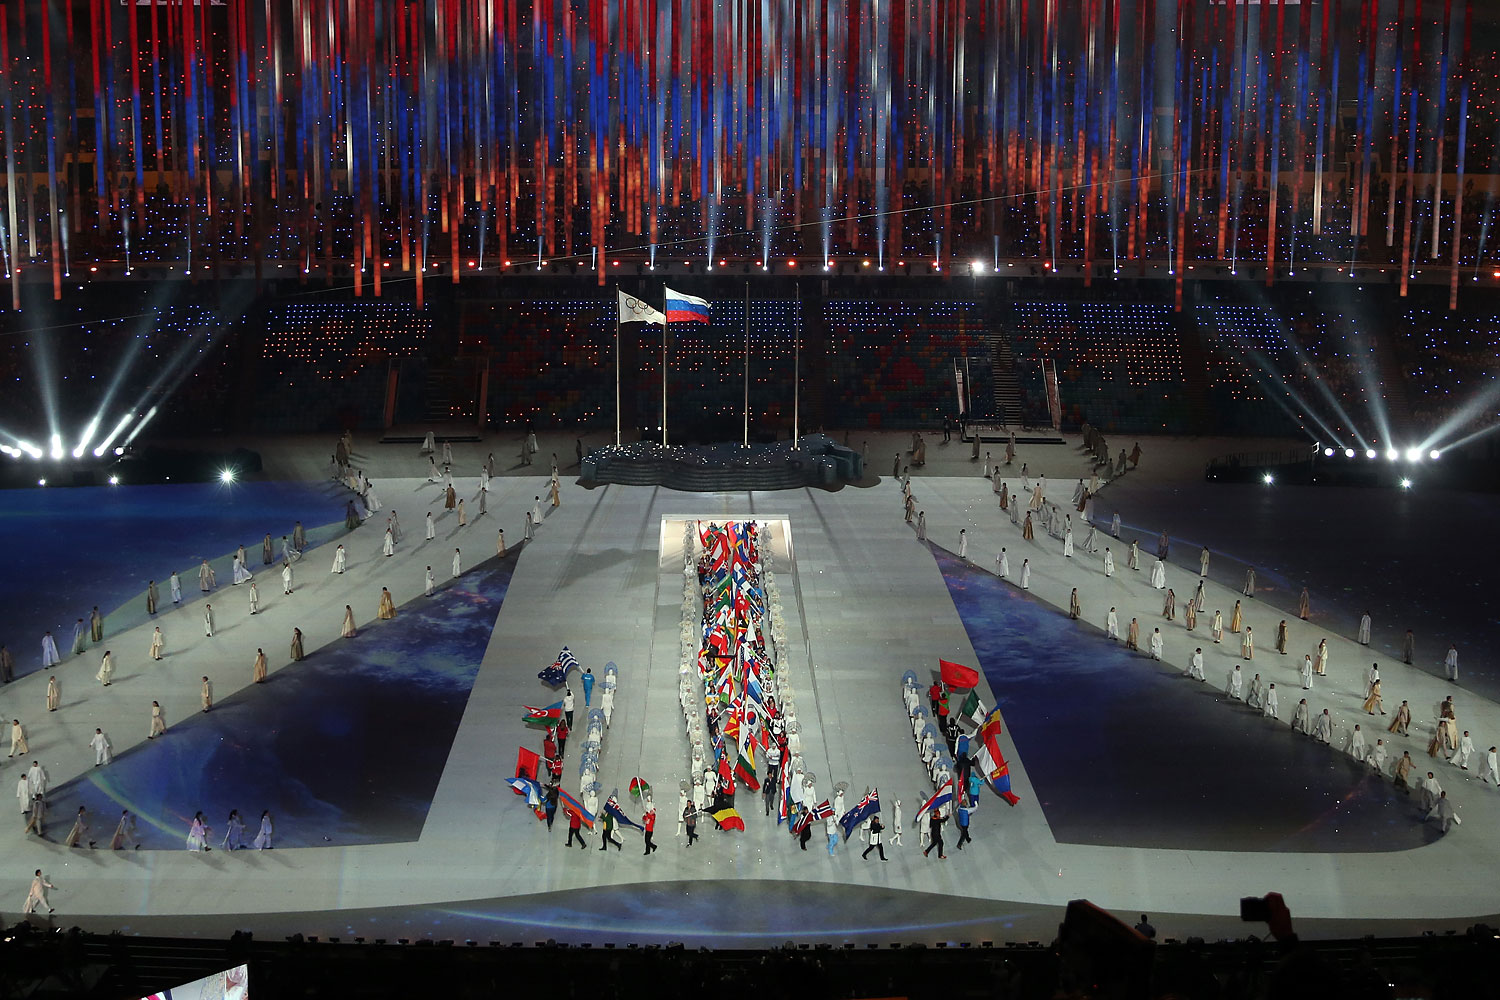 The flags of the competiting nations enter the arena.